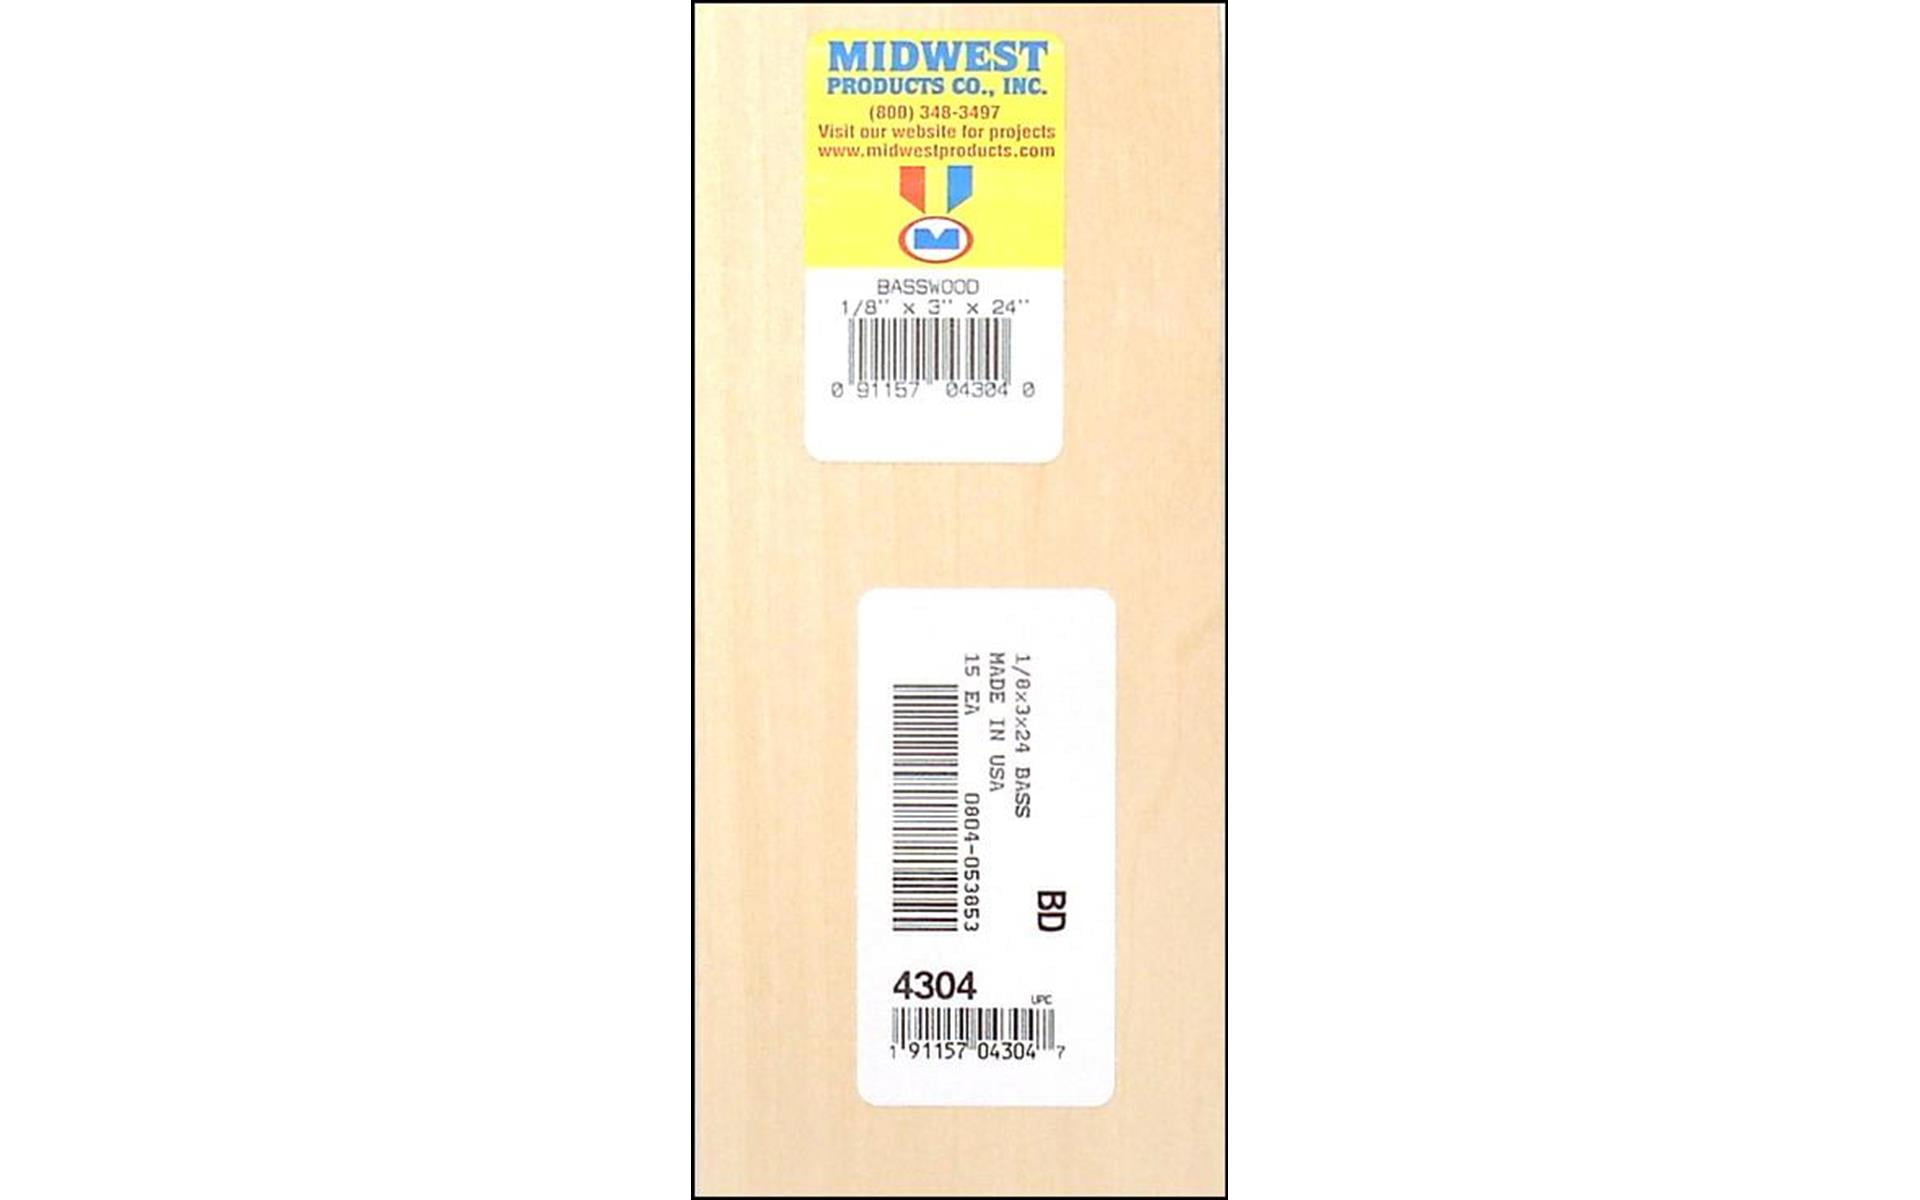 Wood Square Dowel Rods, 1/4-inch x 24, Pack of 25 Wooden Craft